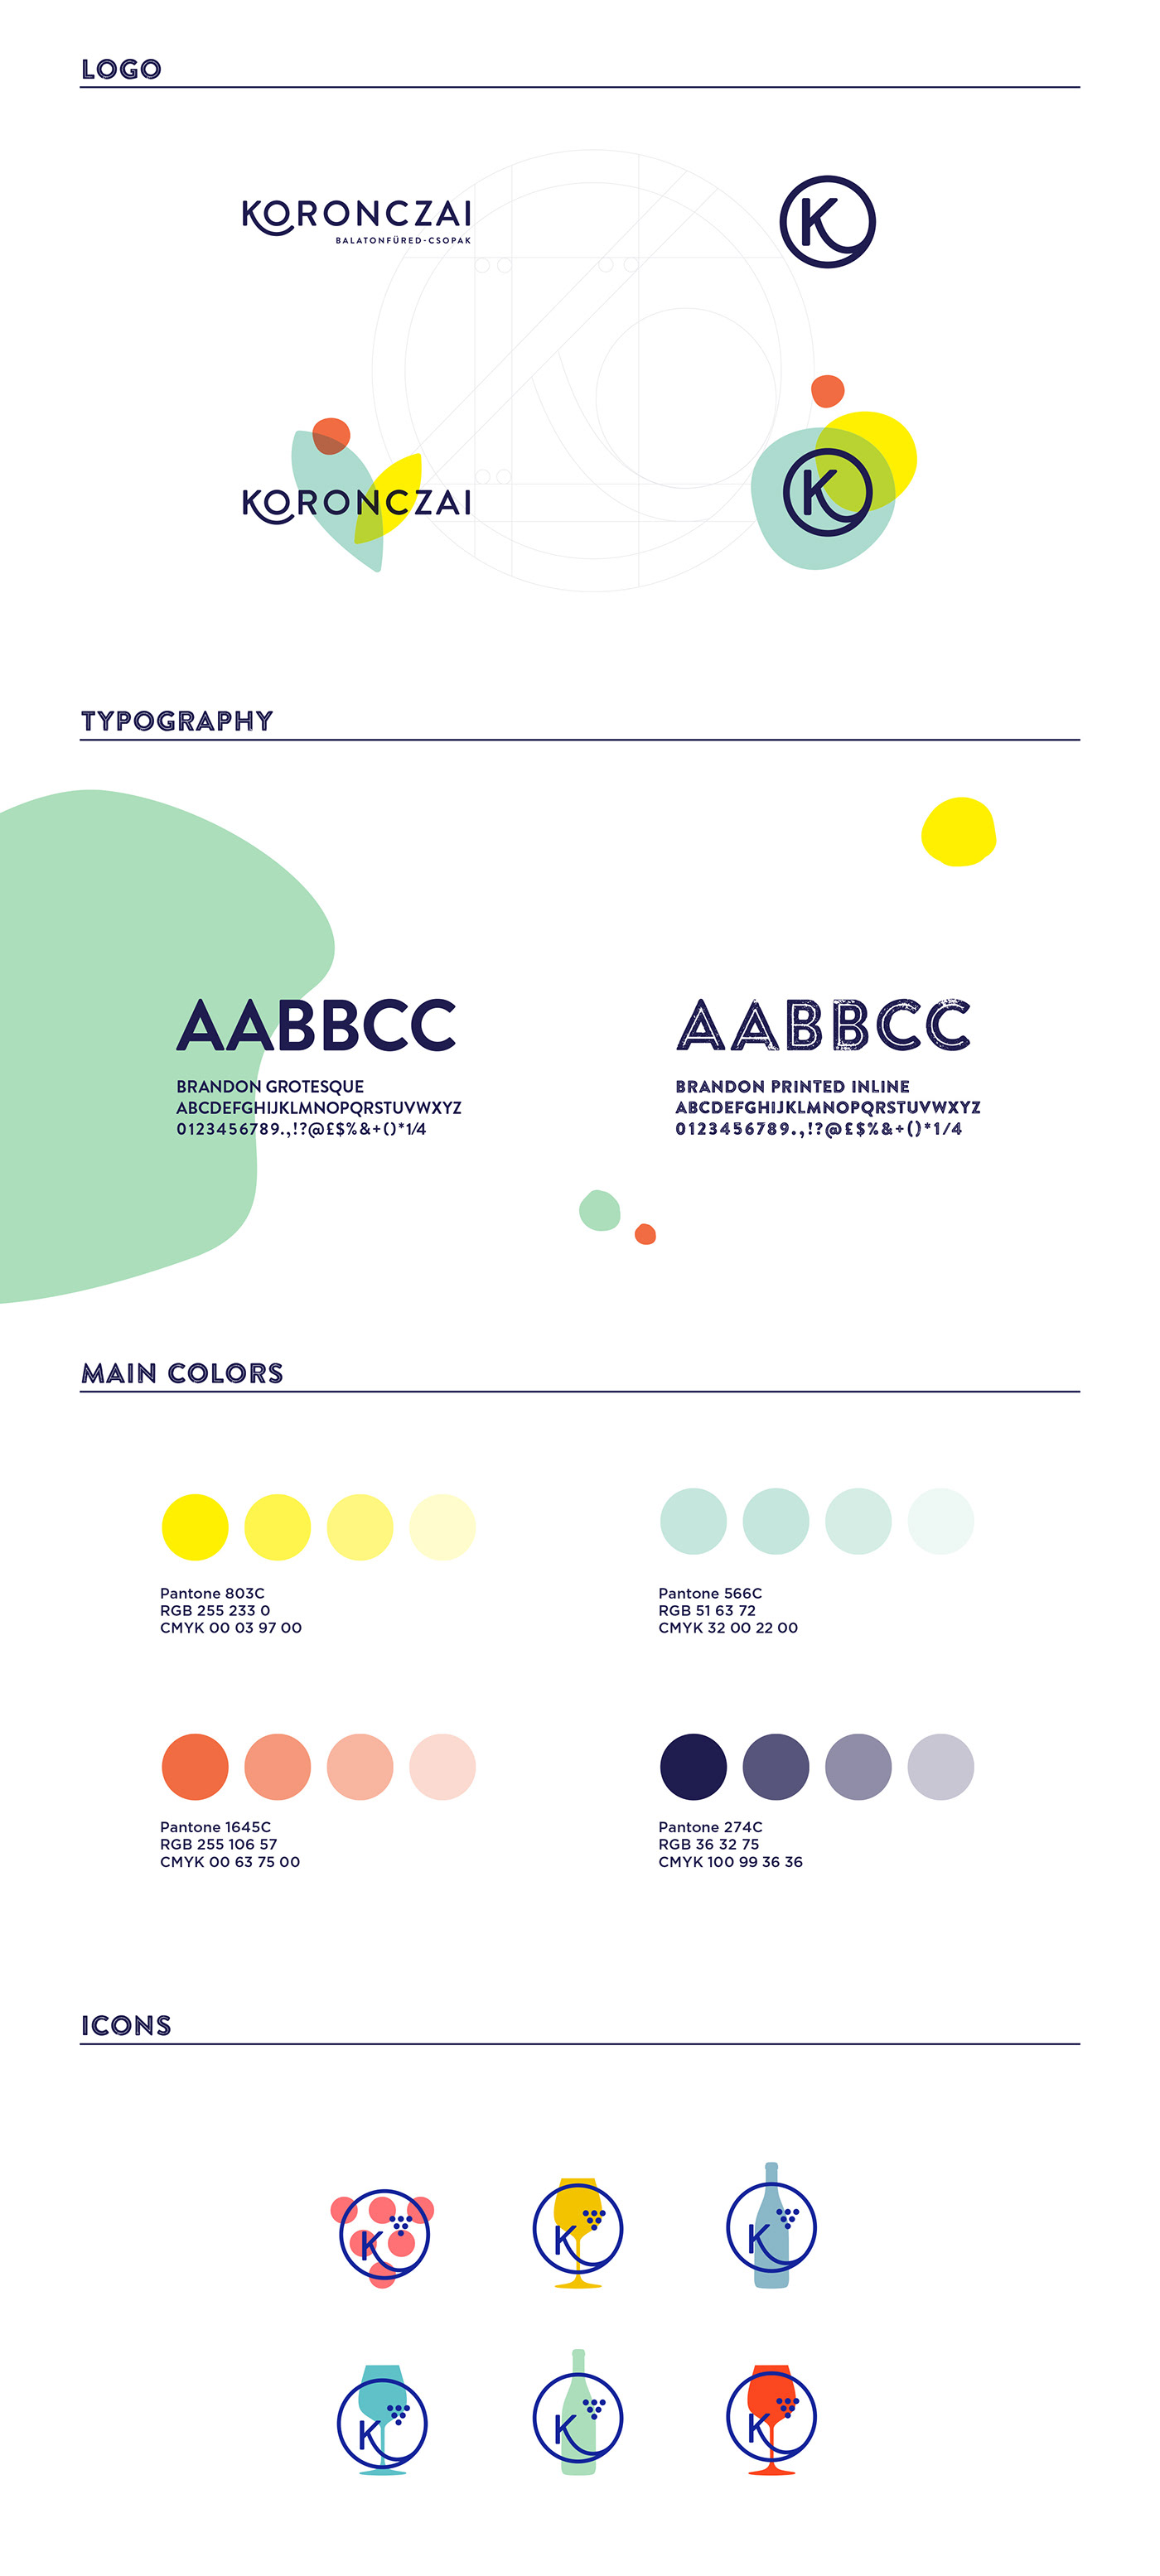 a straightforward, cheerful identity design, using a vibrant color palette and playful patterns
